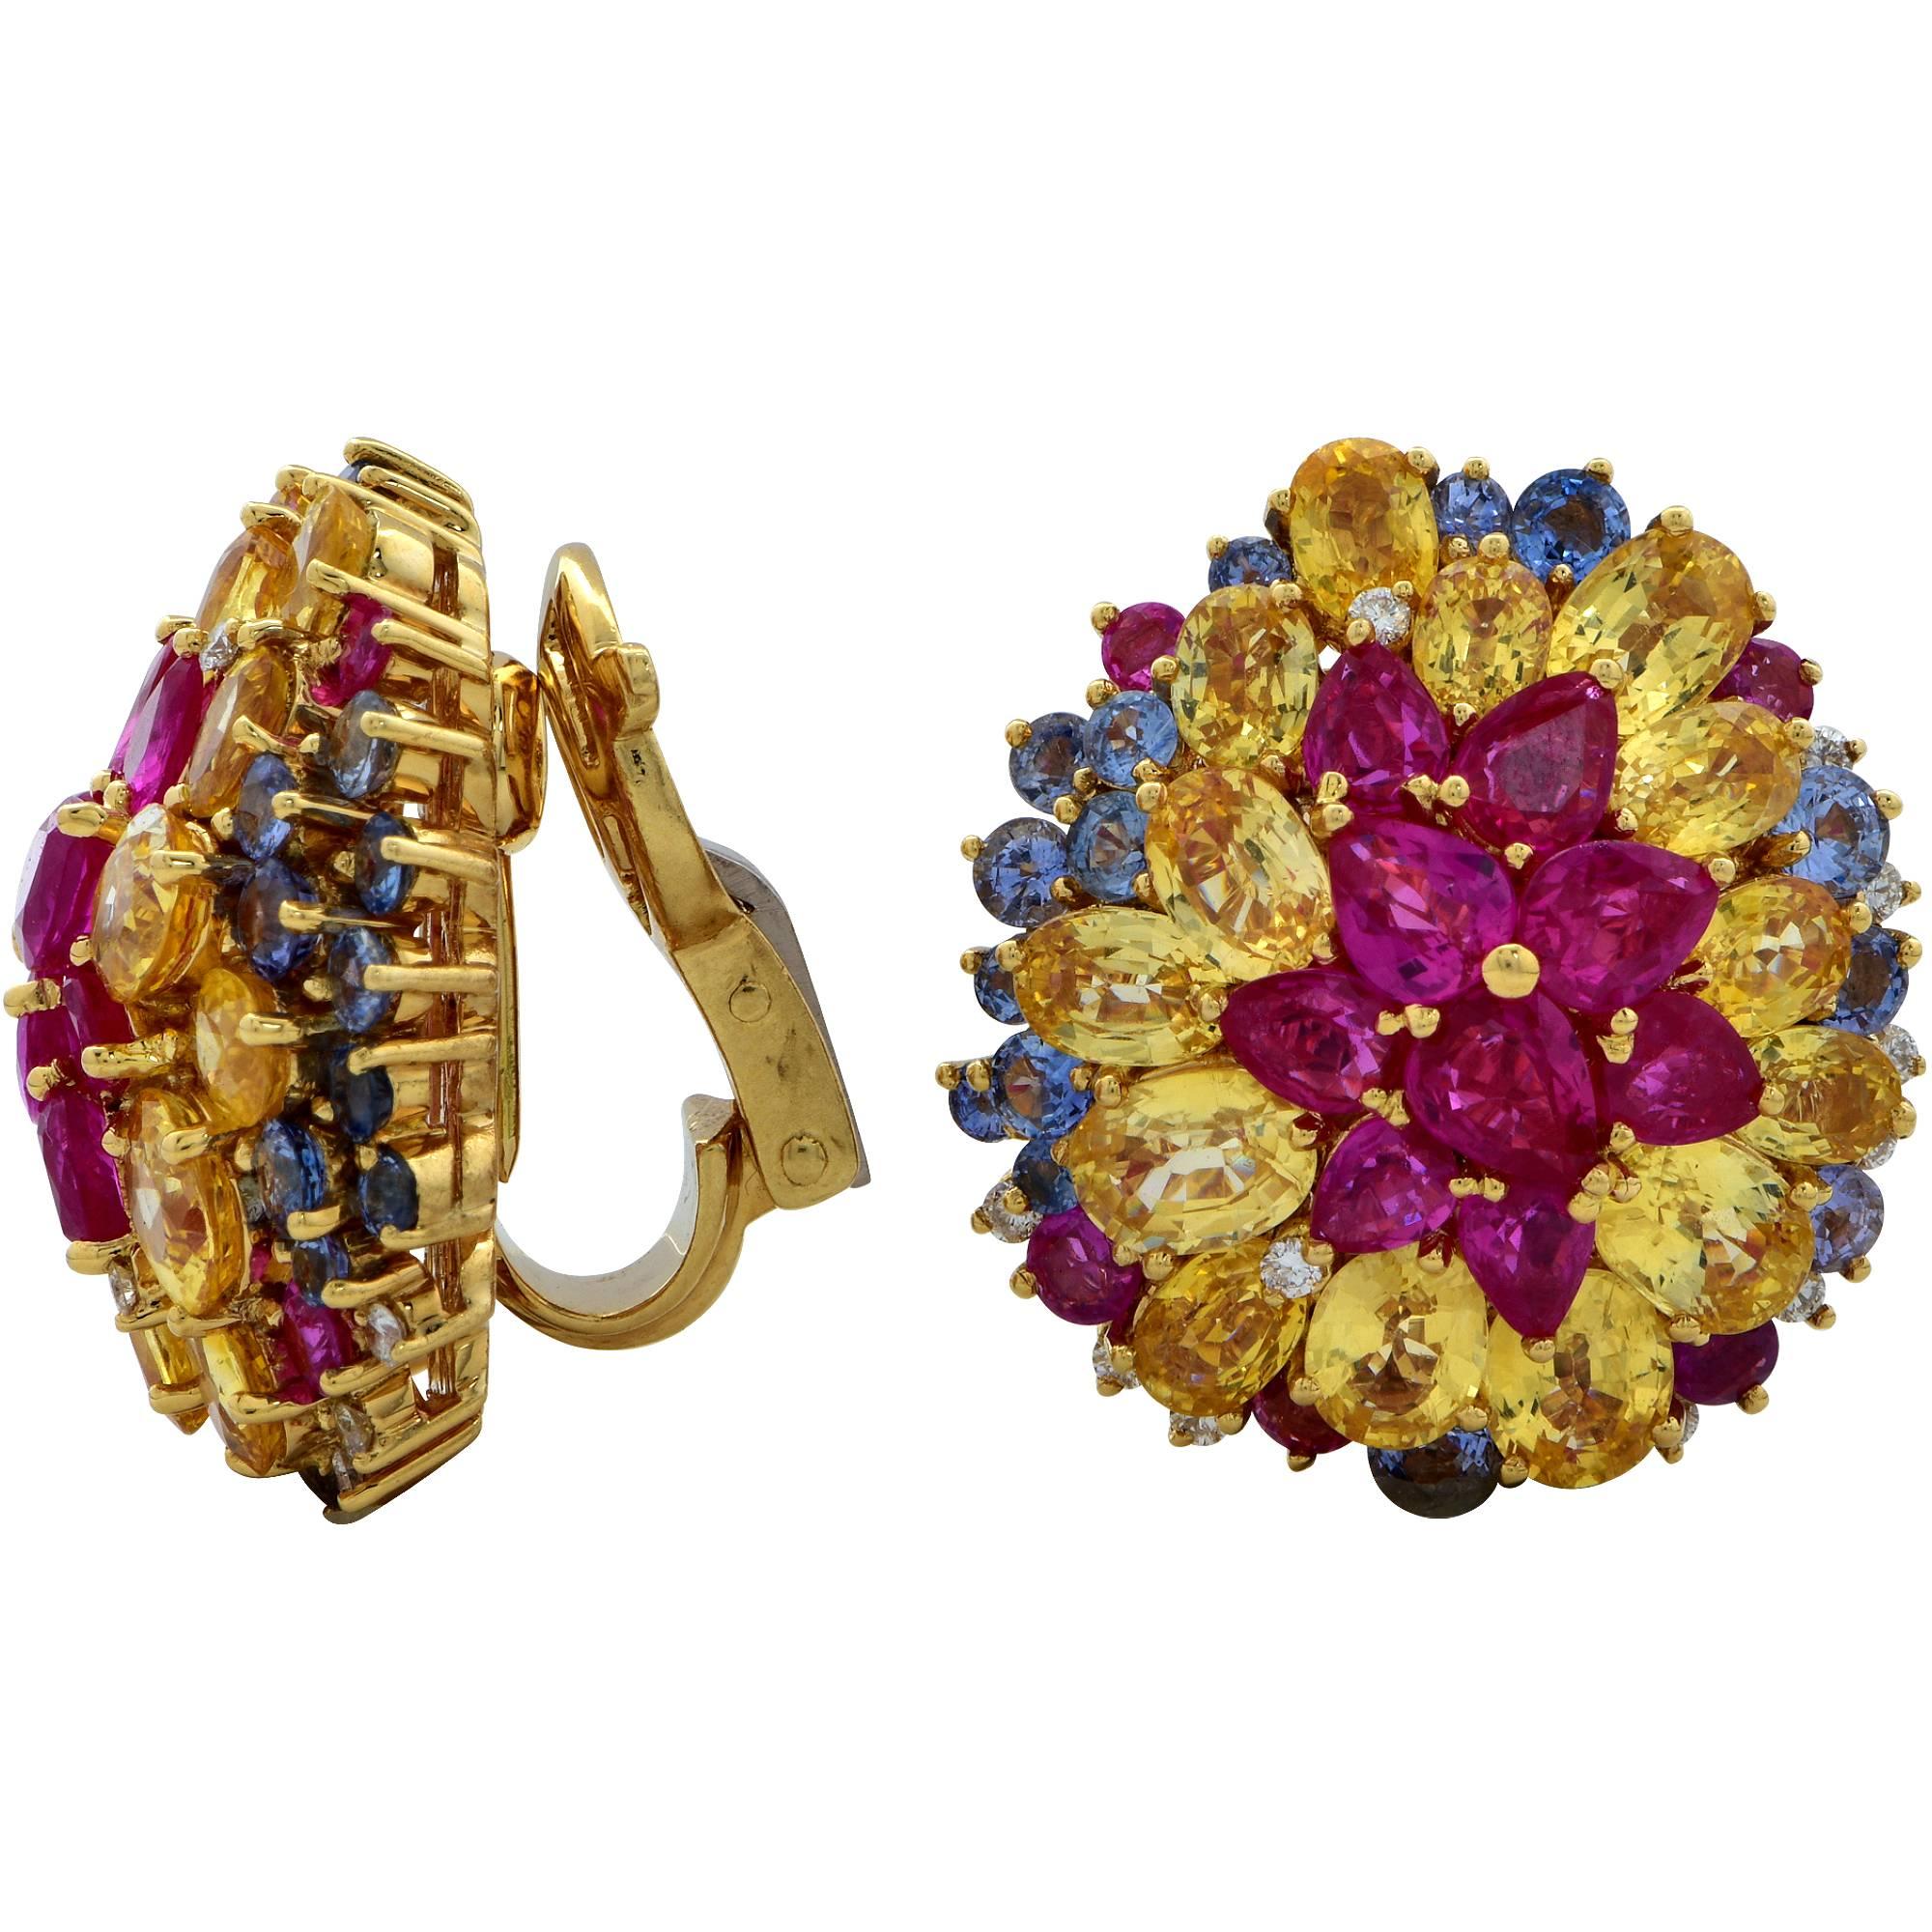 Spectacular 18k yellow gold earrings featuring 84 mixed shape yellow sapphire, ruby, diamond and blue sapphires weighing approximately 17.65cts total accented with 24 diamonds weighing approximately .25cts total.

The earrings measure 22mm by